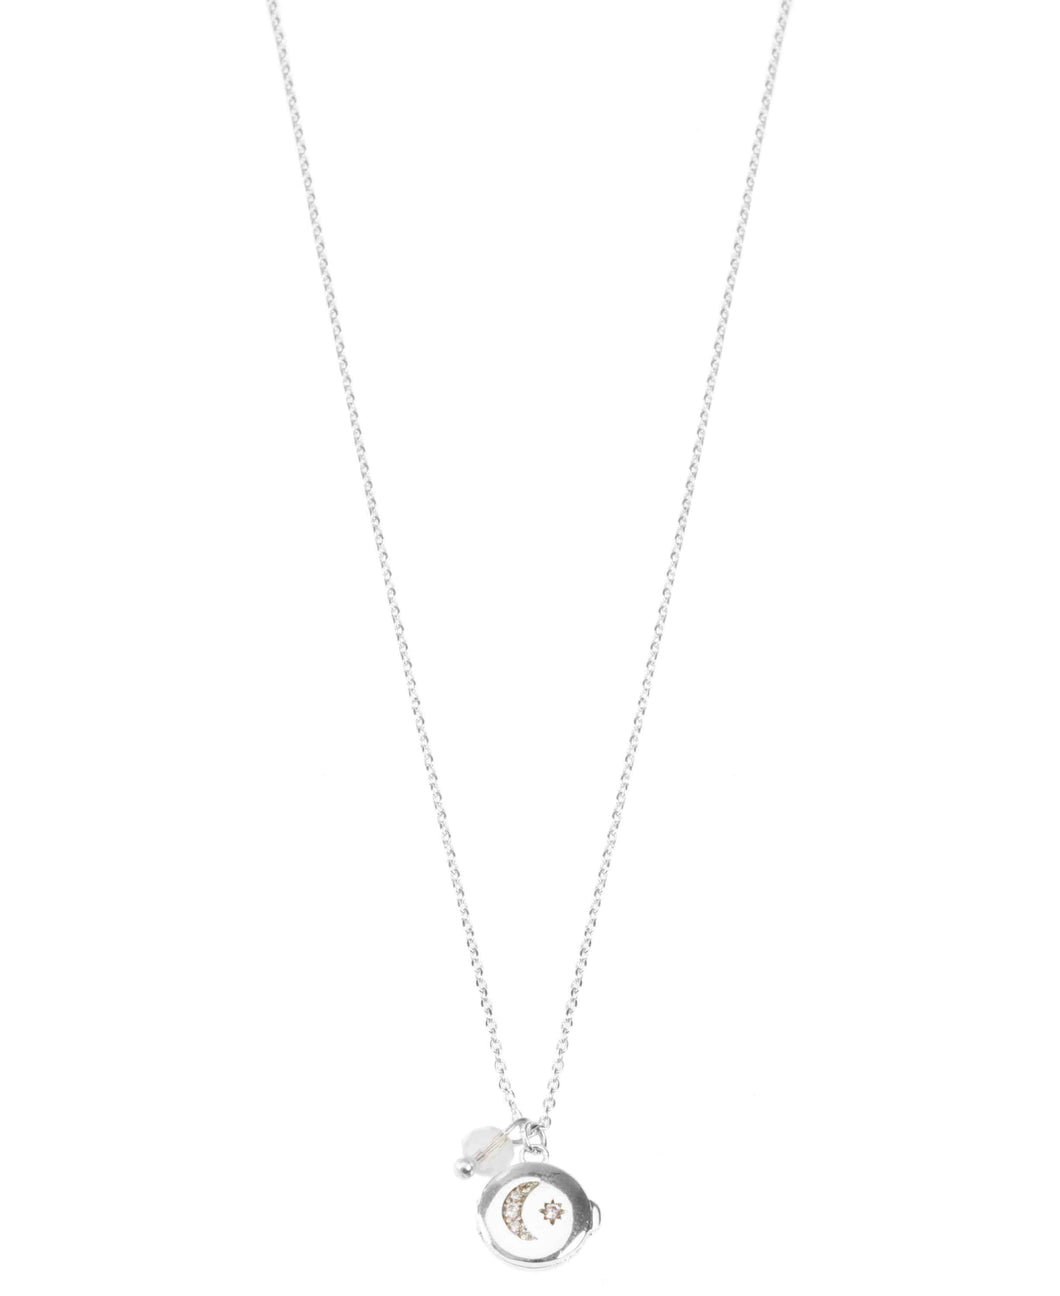 Hultquist Moon, Star & Crystal Necklace